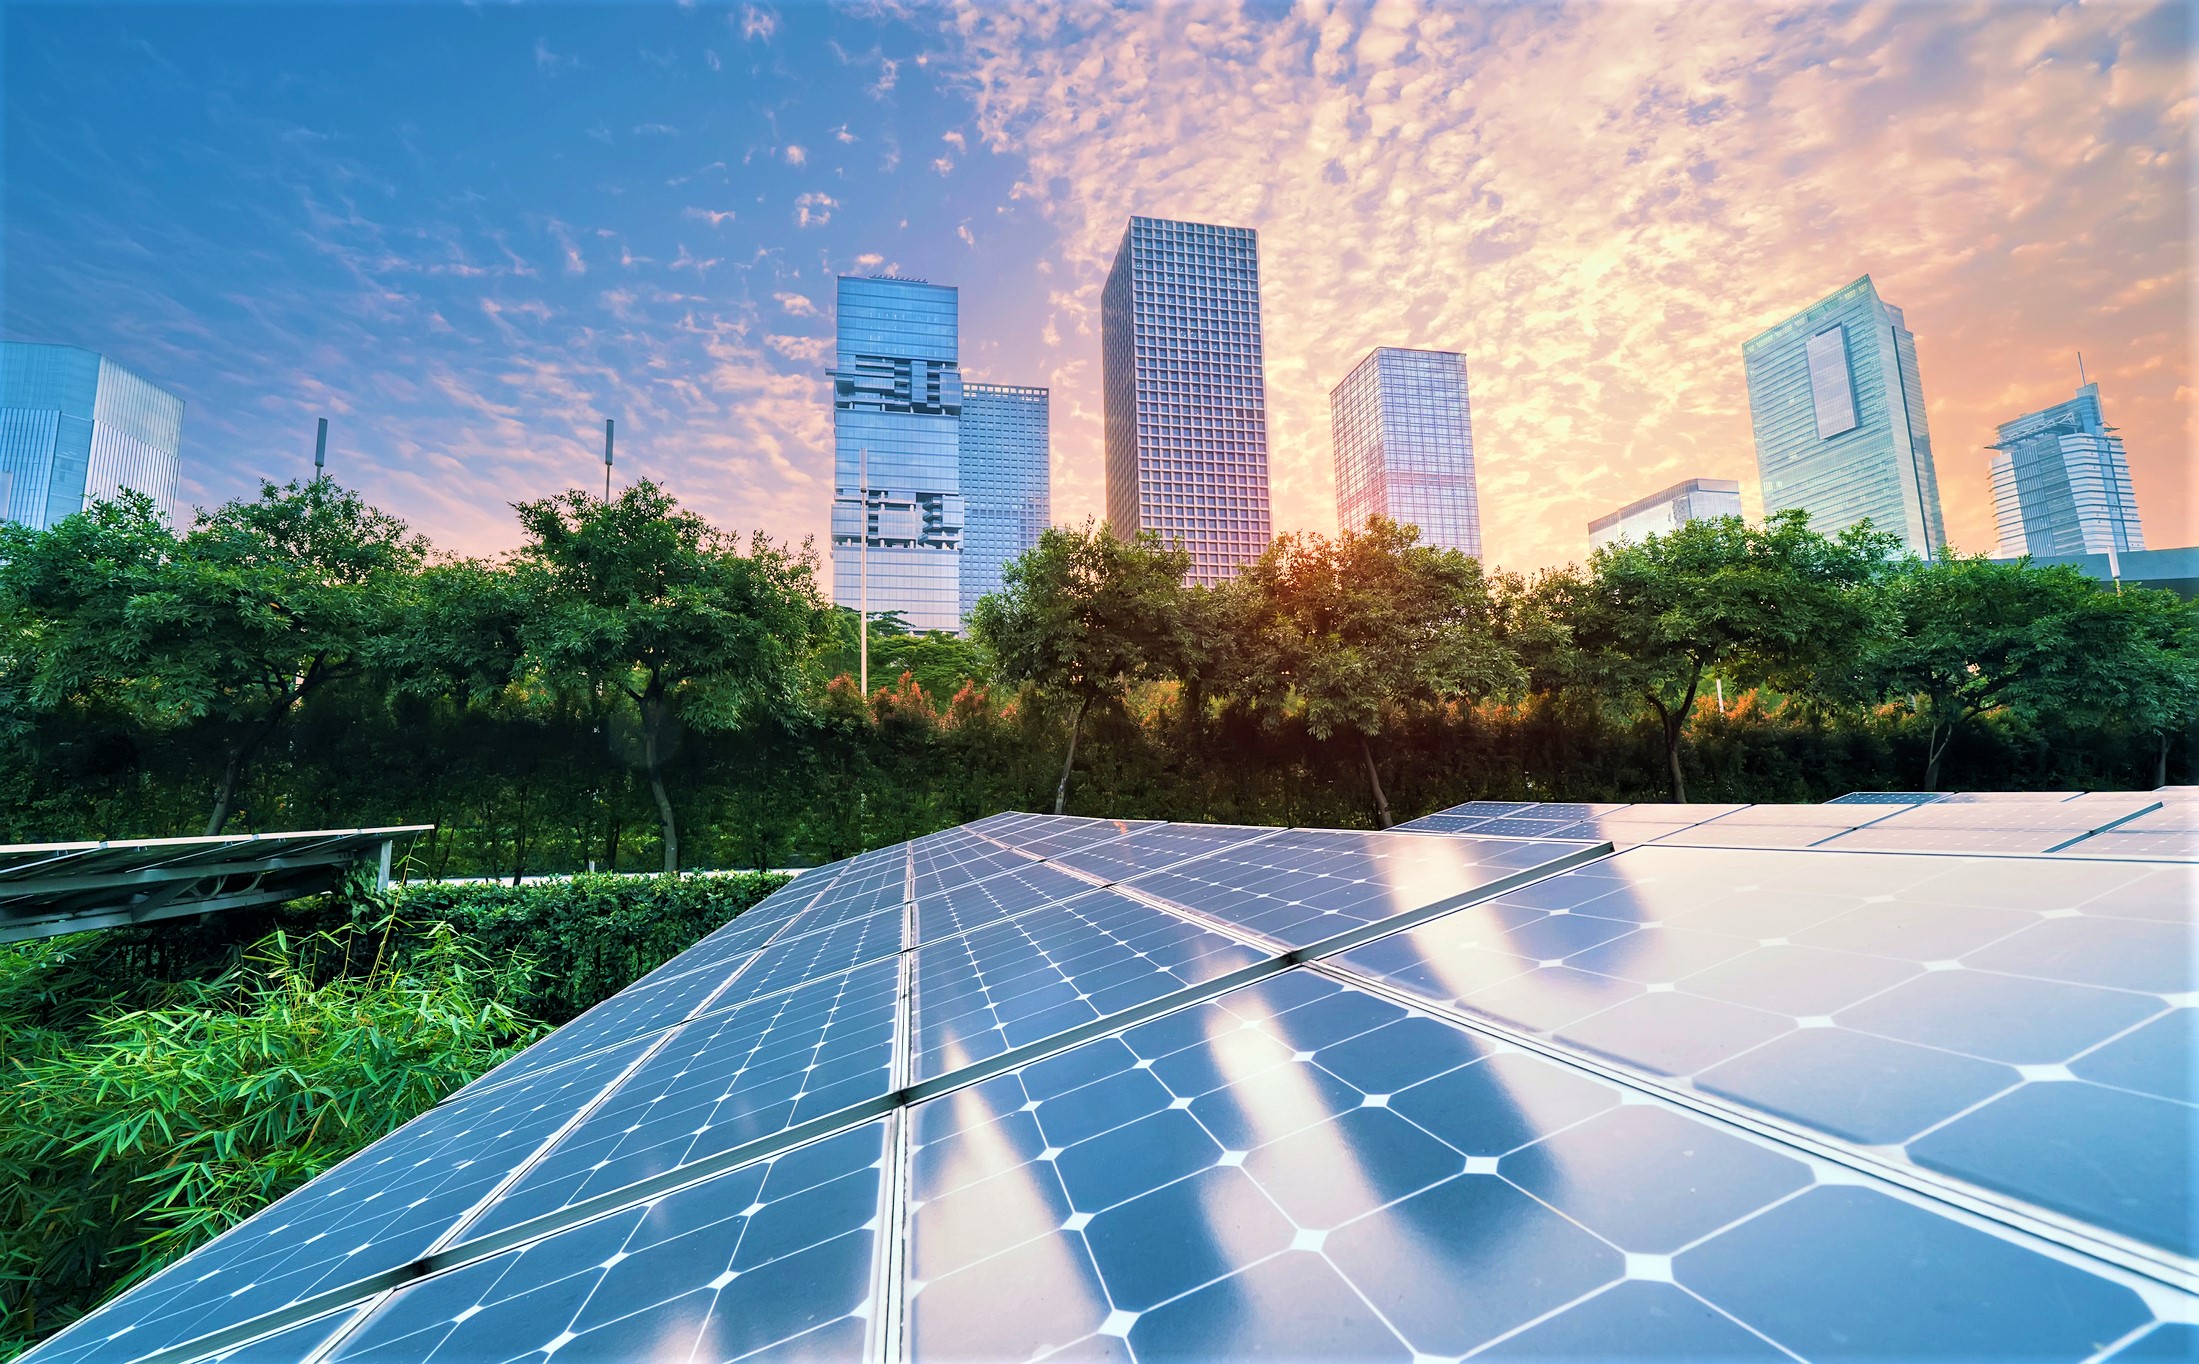 solar panels with a cityscape and trees in the background